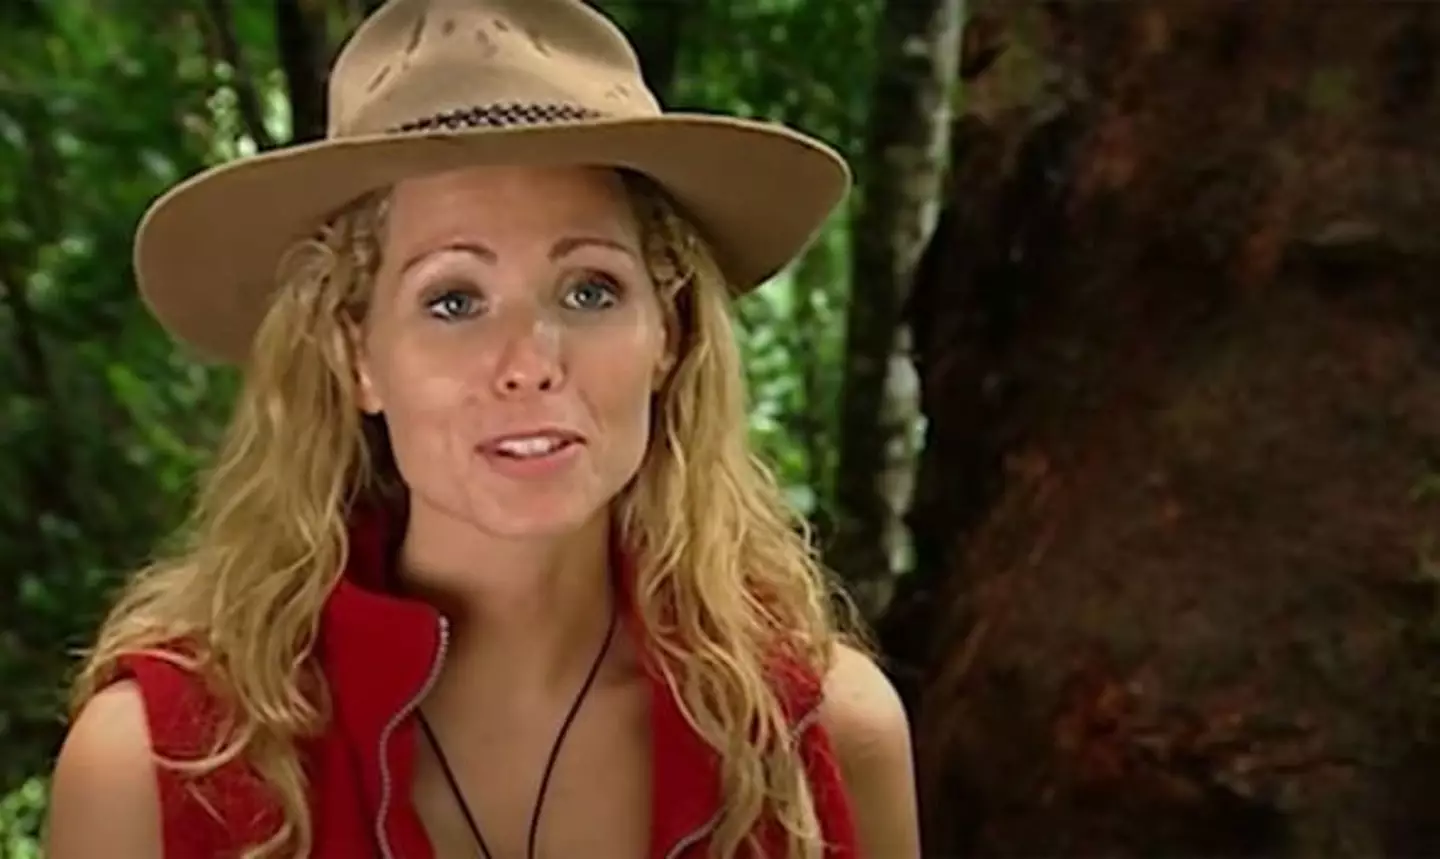 Nicola McLean appeared on I'm A Celeb back in 2008.